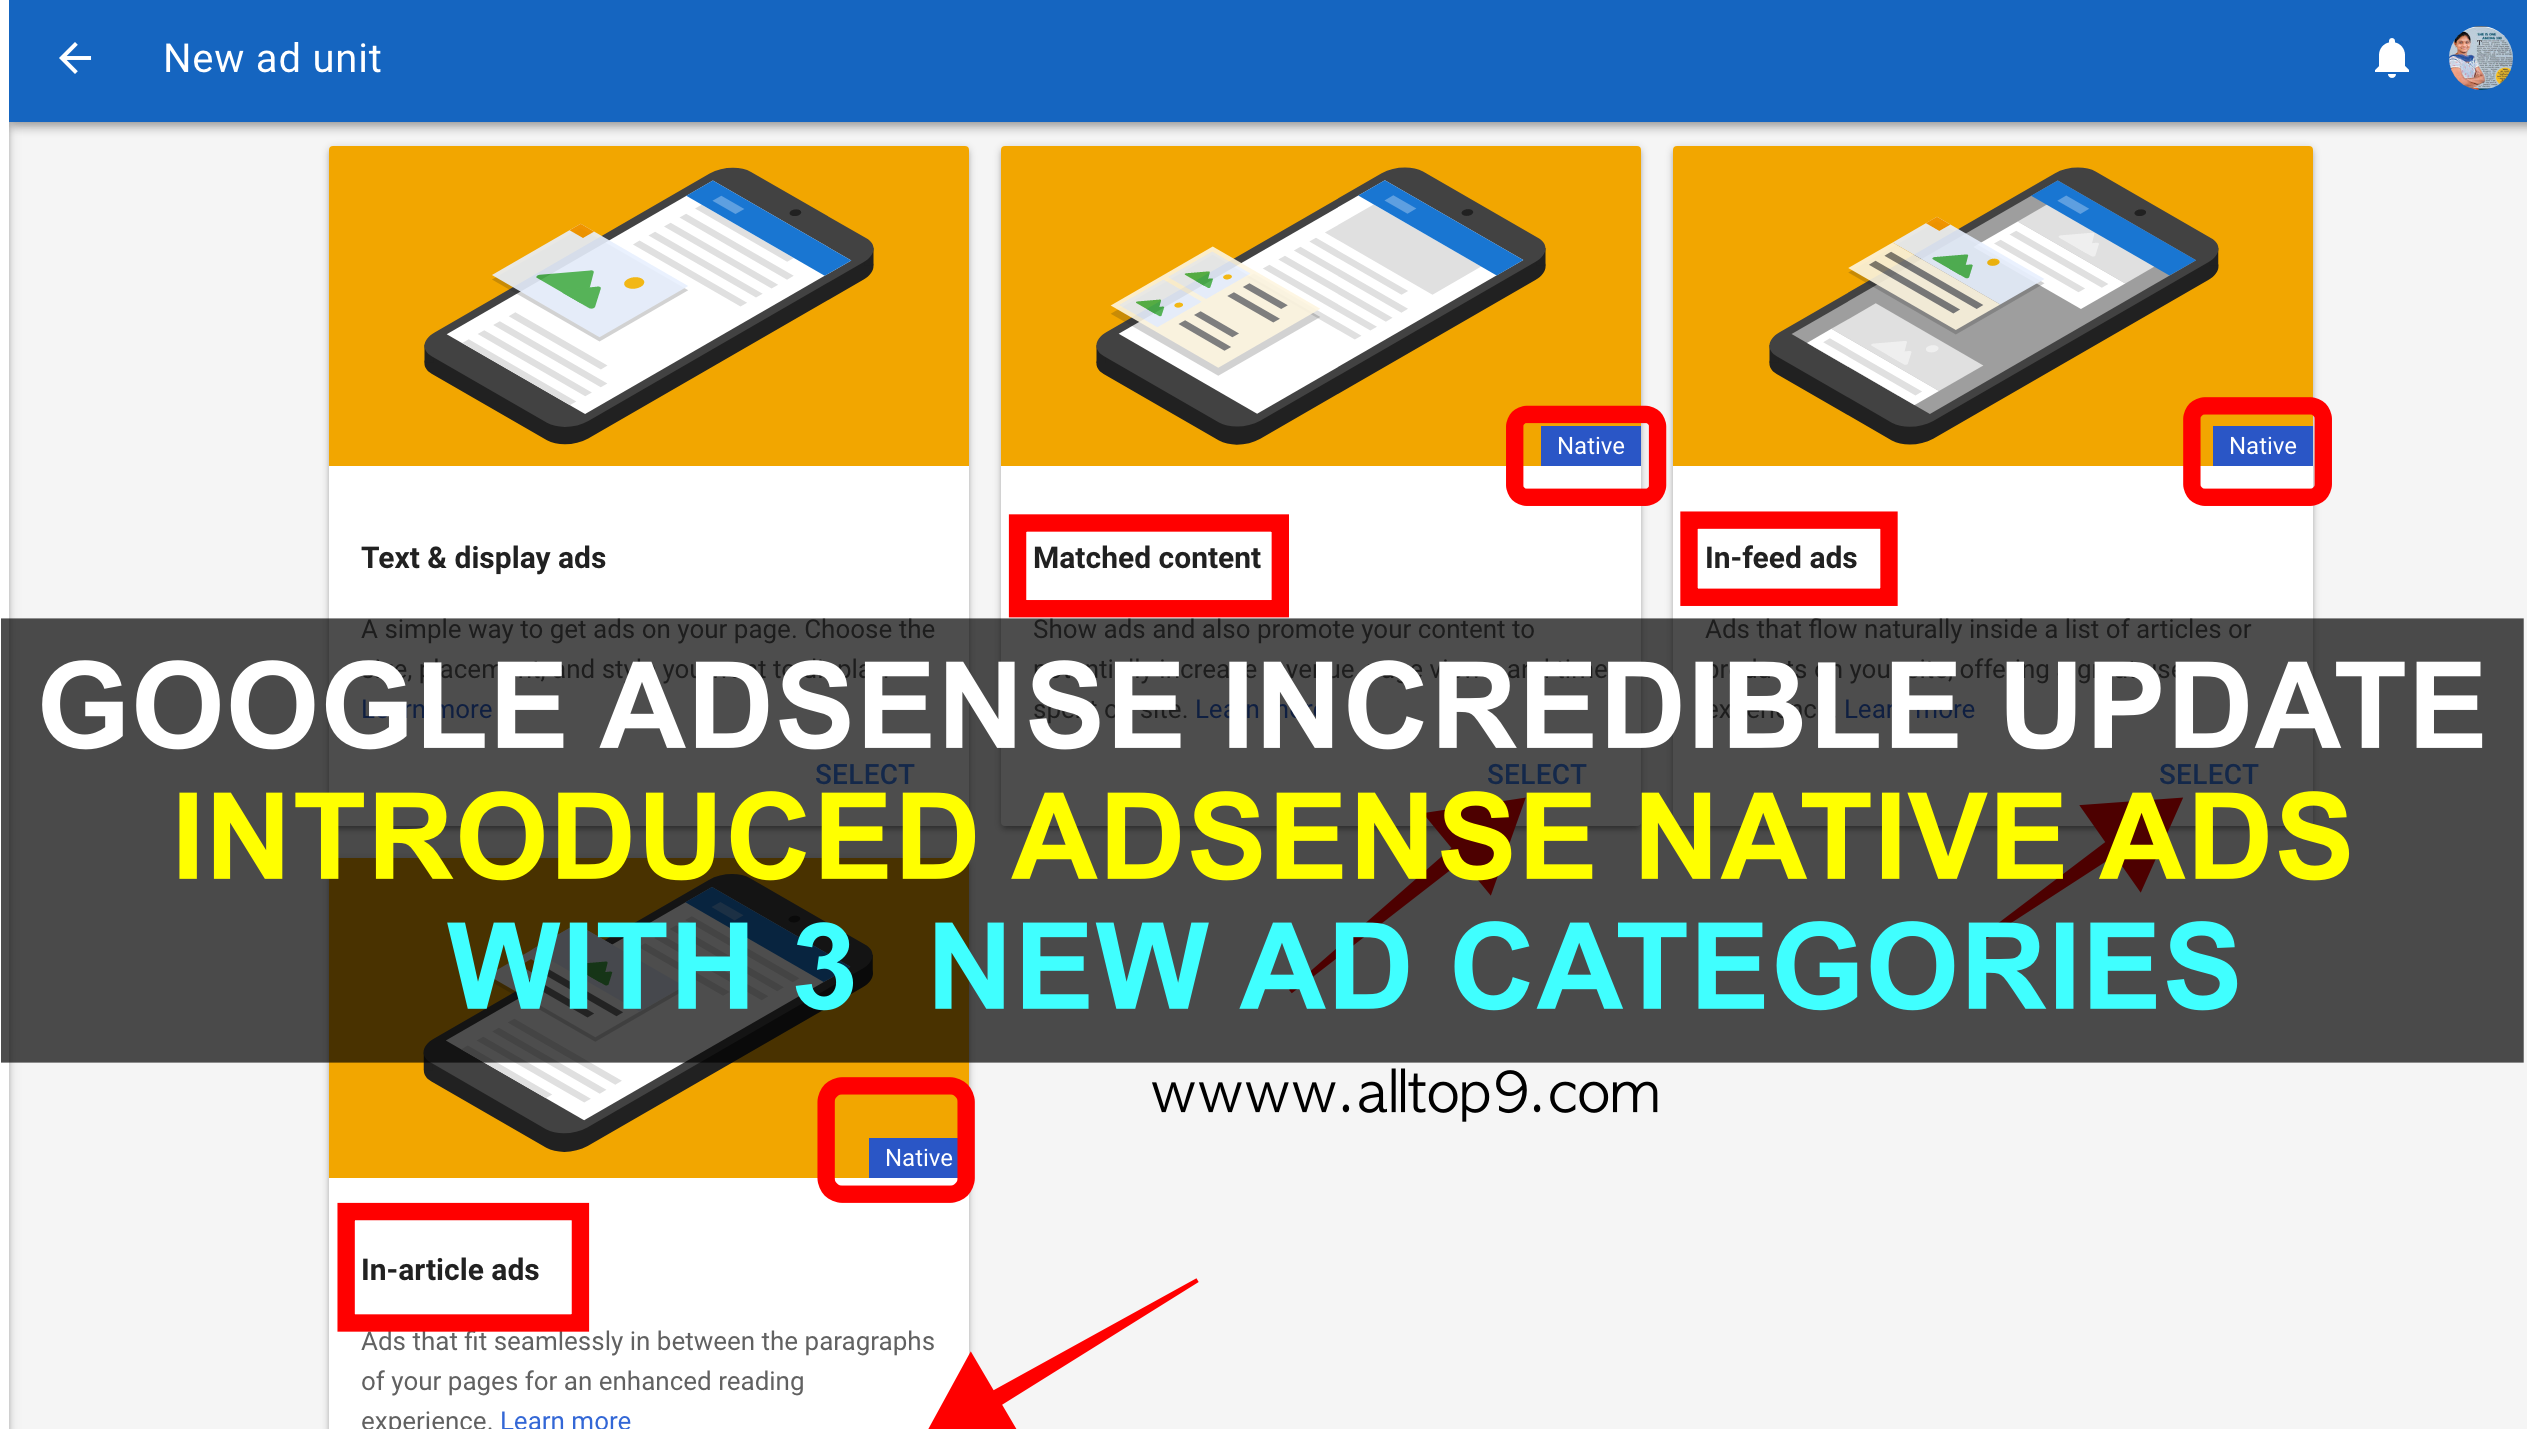 google-adsense-incredible-update-introducing-adsense-native-ads-infeed-inarticle-matchedcontent-ad-categories